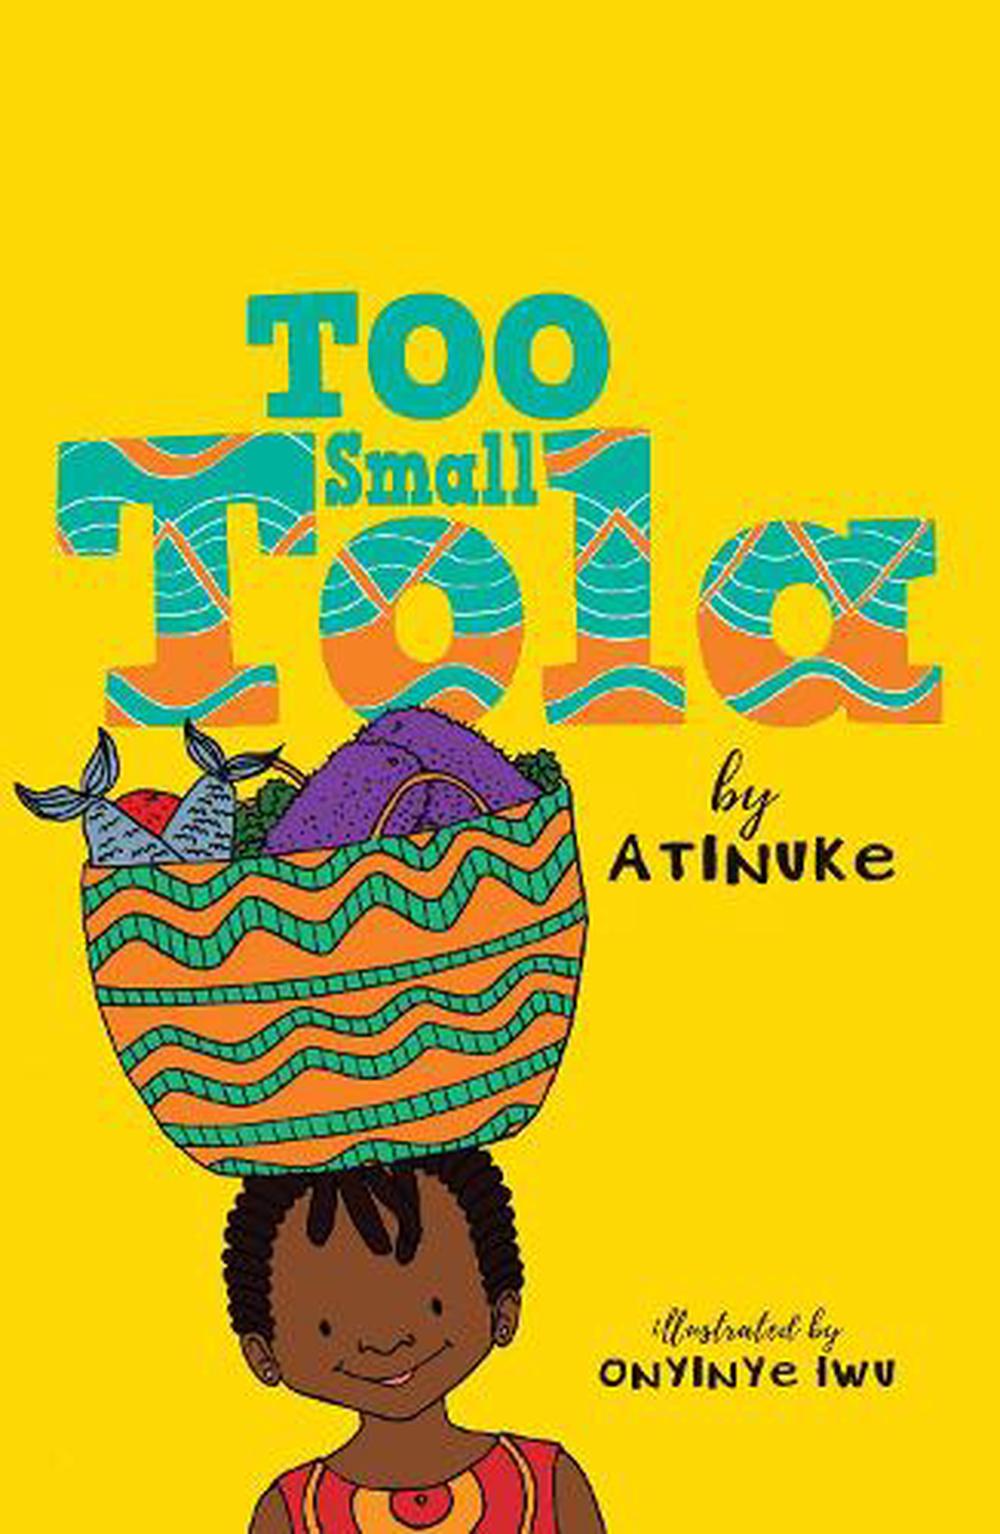 Too Small Tola and the Three Fine Girls by Atinuke: 9781536233124 |  : Books